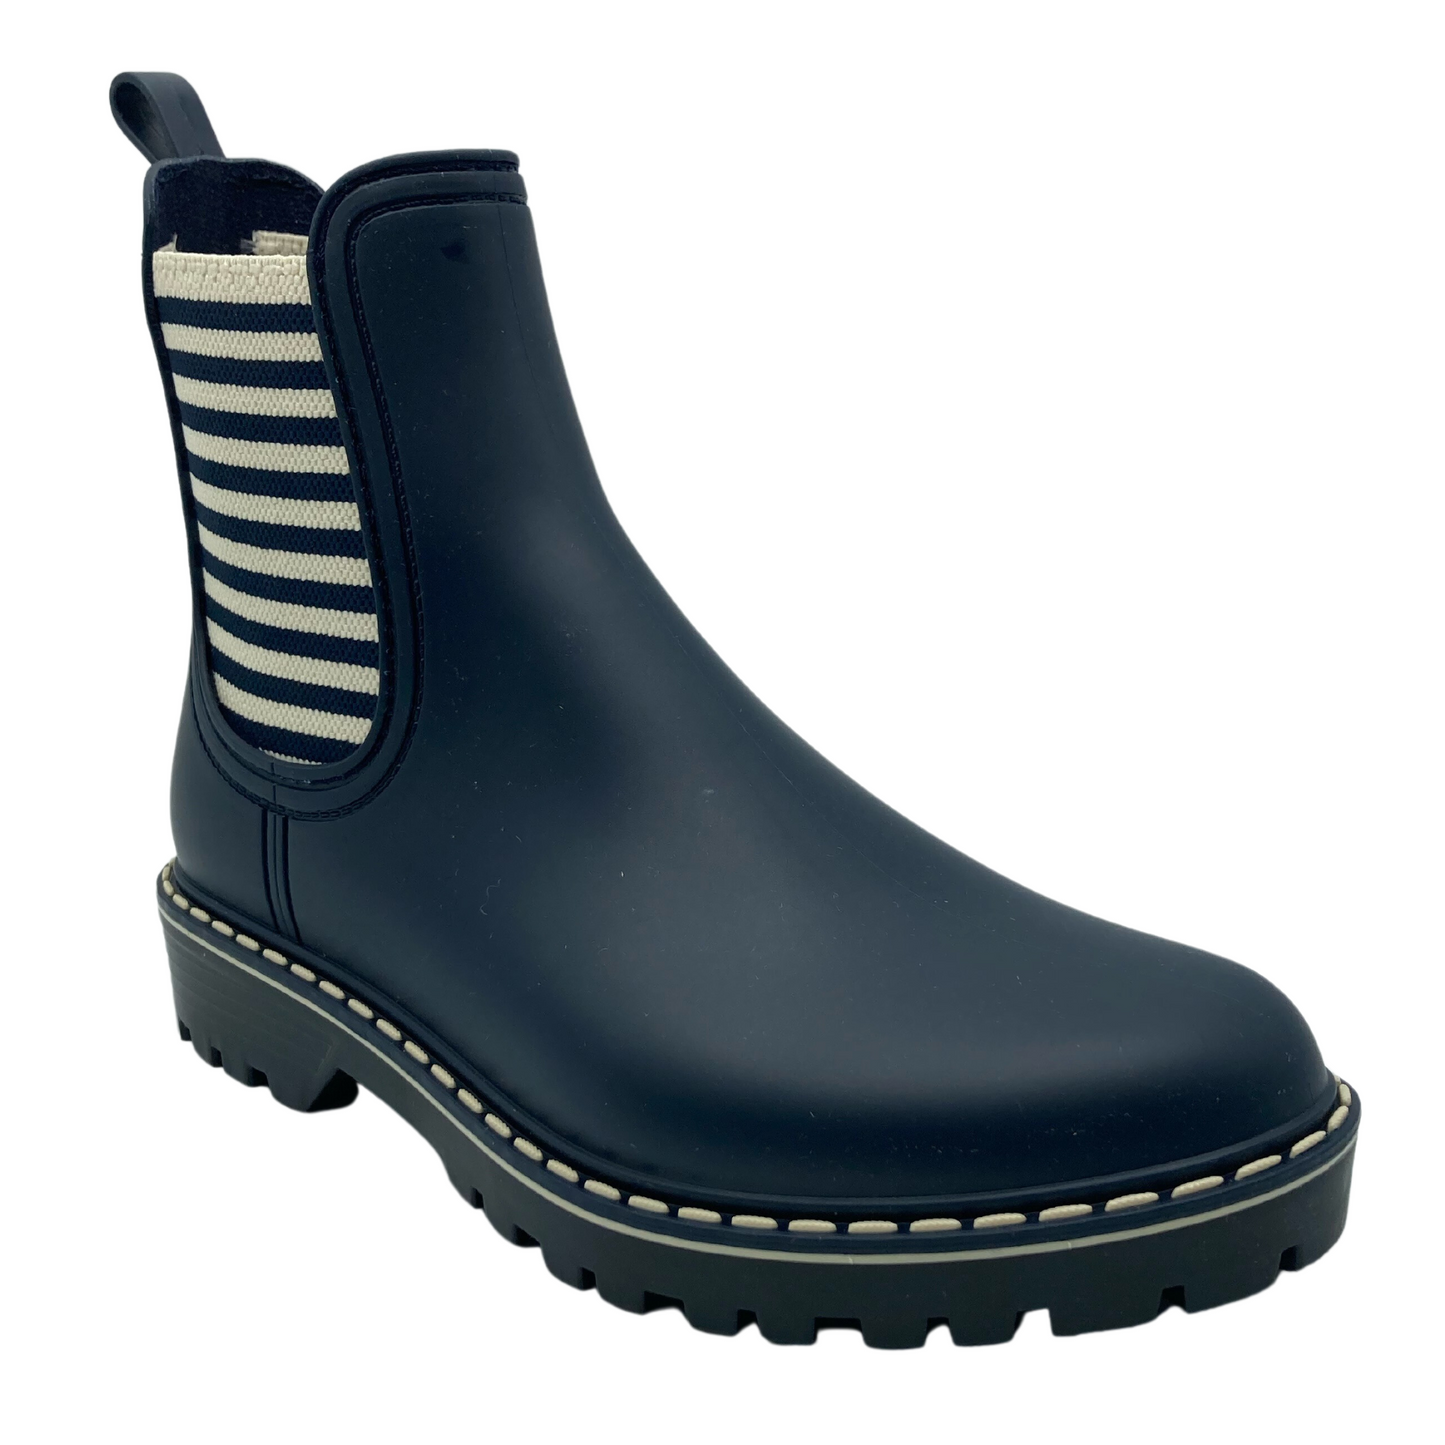 45 degree angled view of navy short boot with white and navy elastic side panel and black rubber outsole